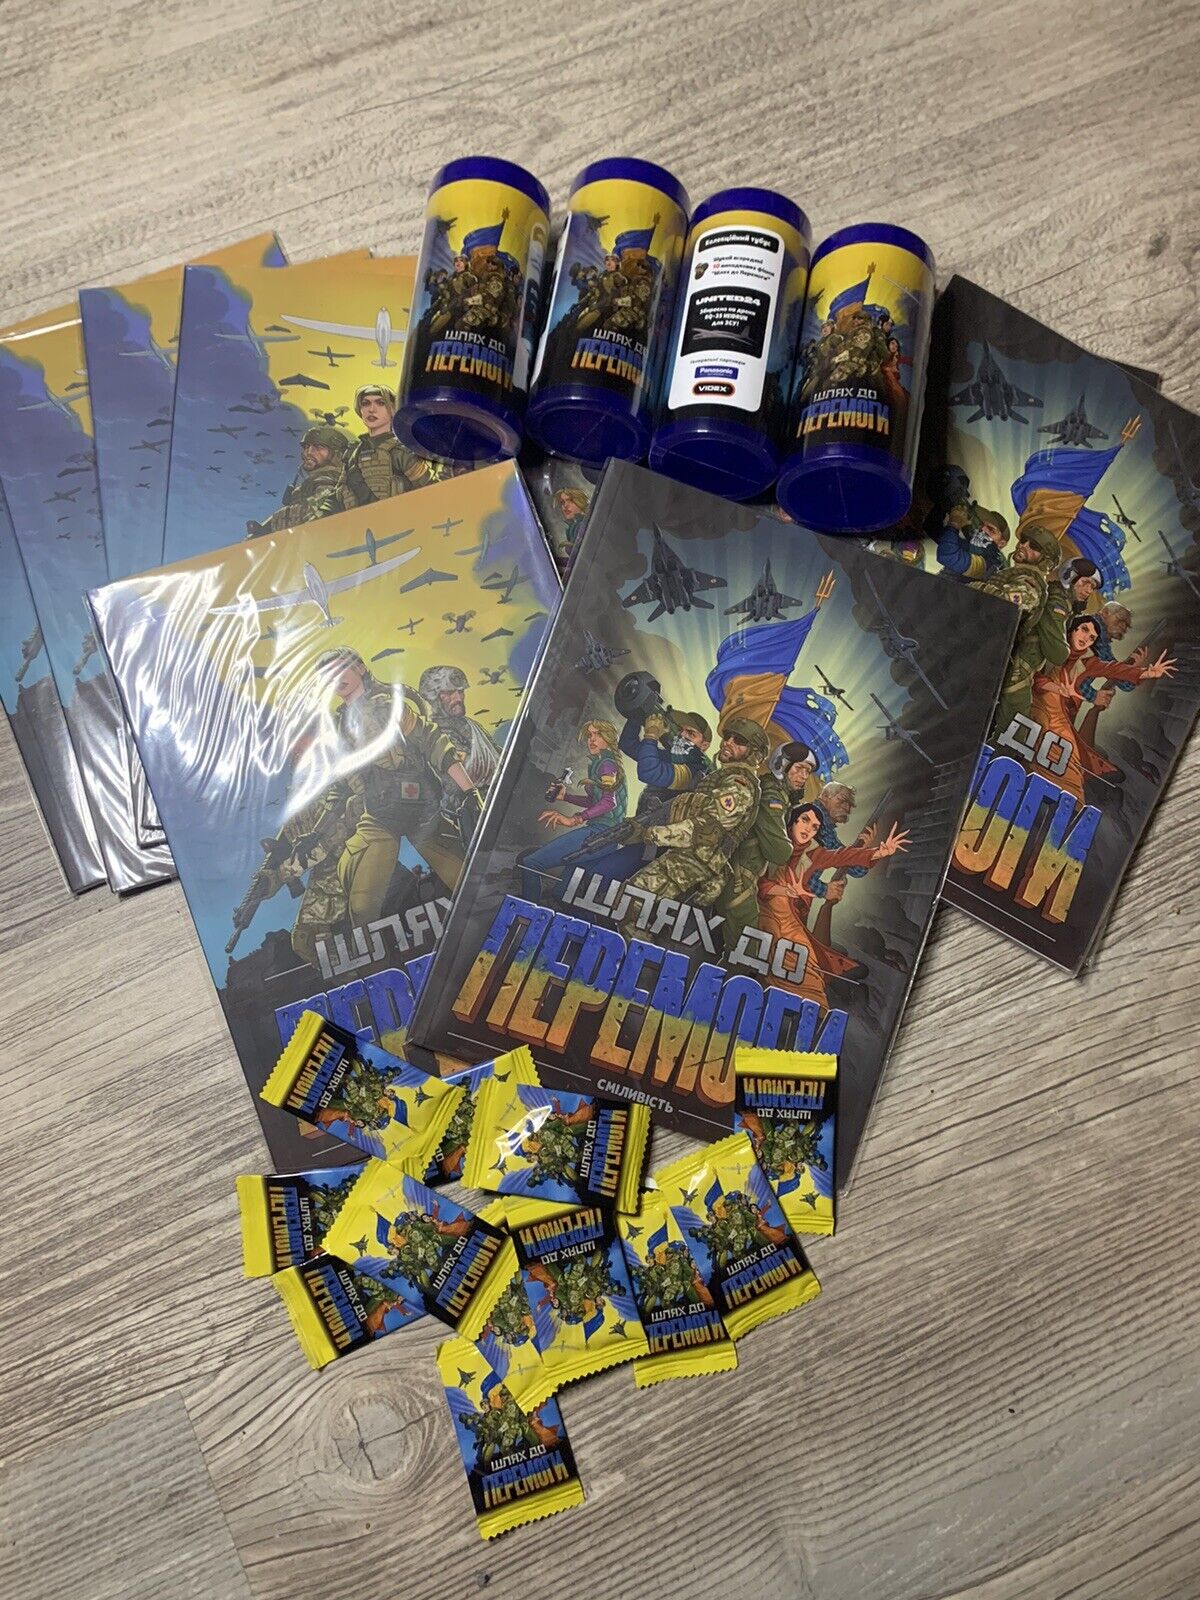 Support Ukraine Collection of opposition to the Ukrainian people